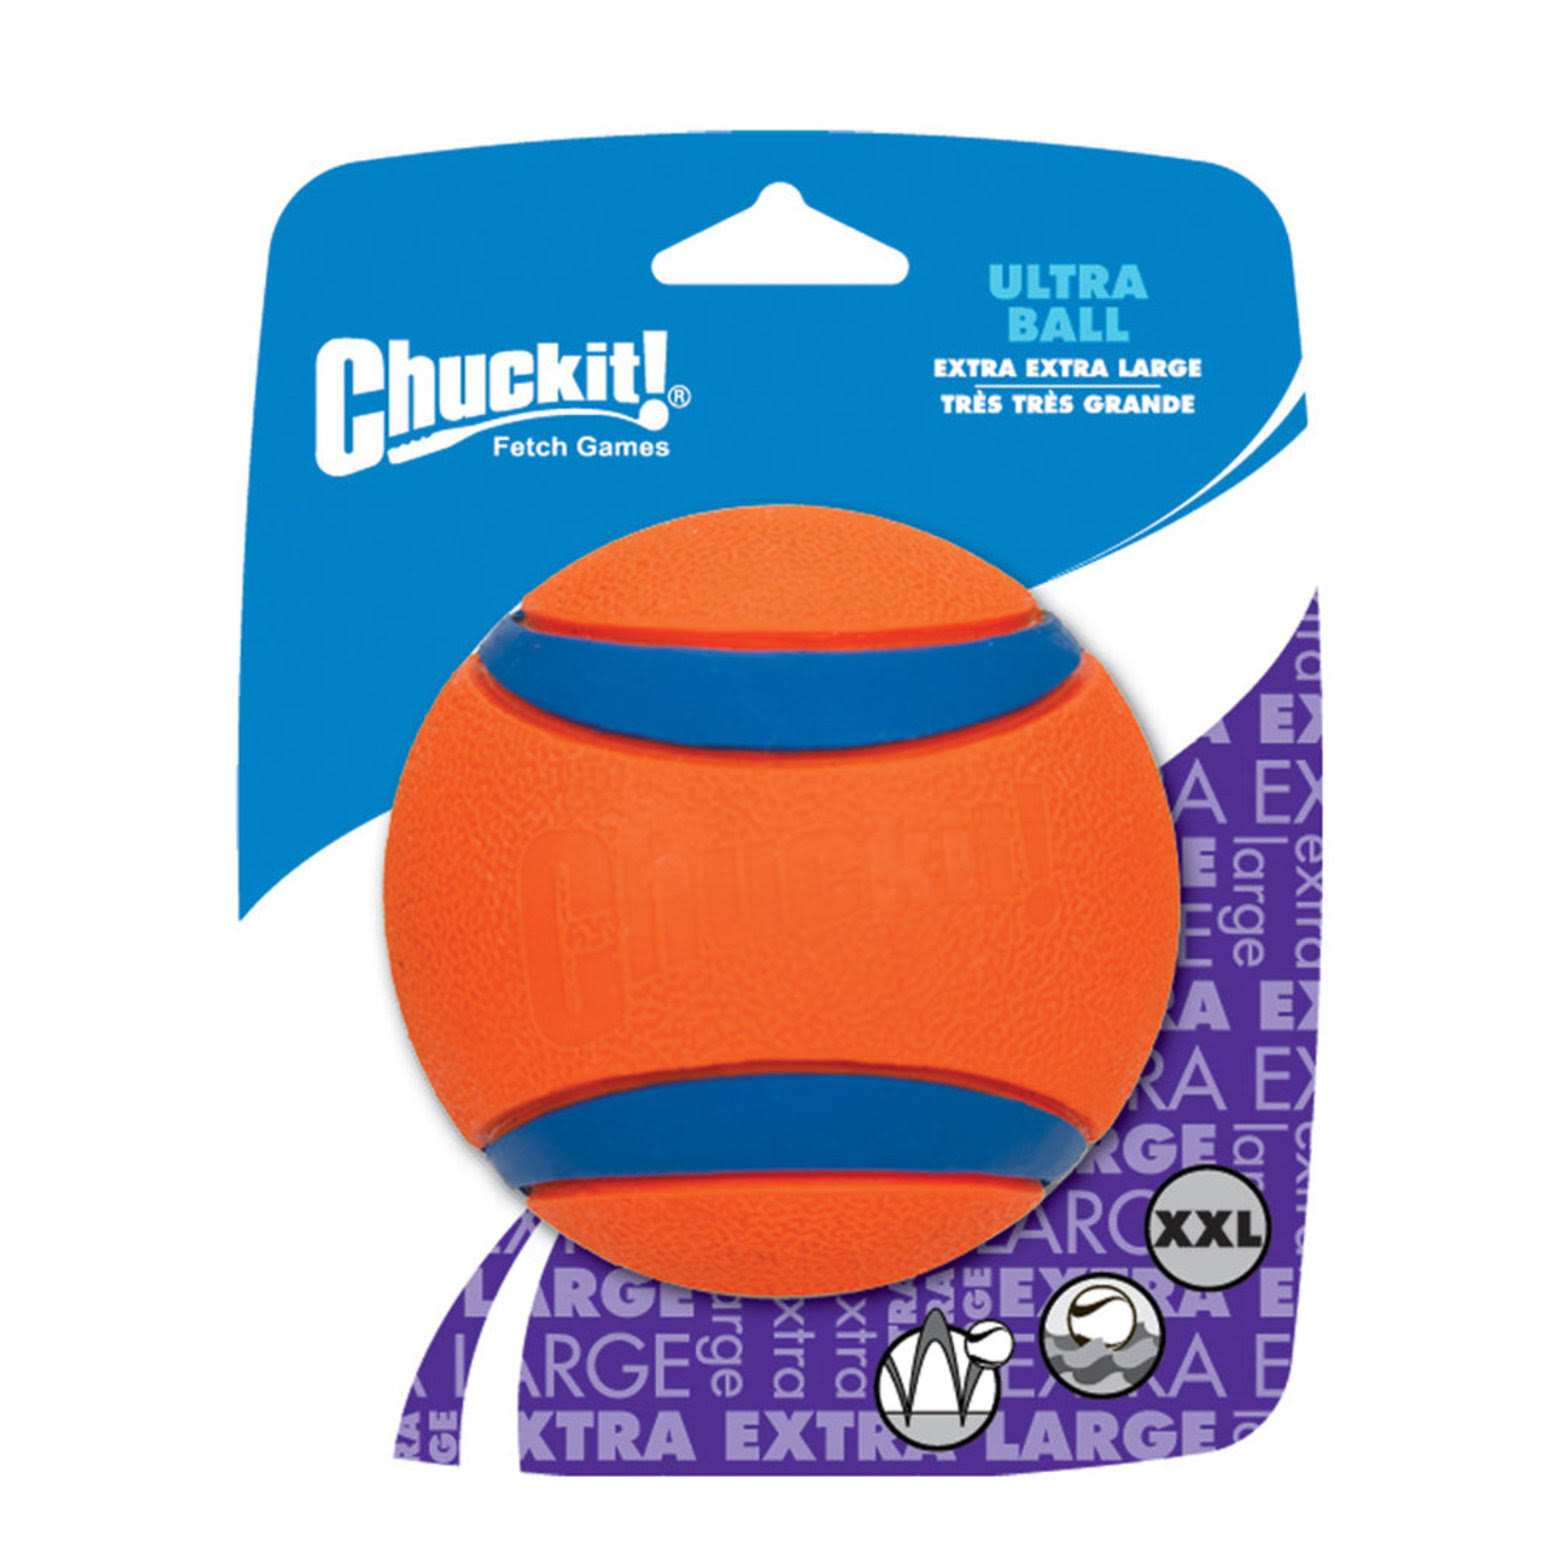 Chuckit Durable Rubber Ultra Ball Dog Fetch Toy - 4", XX-Large